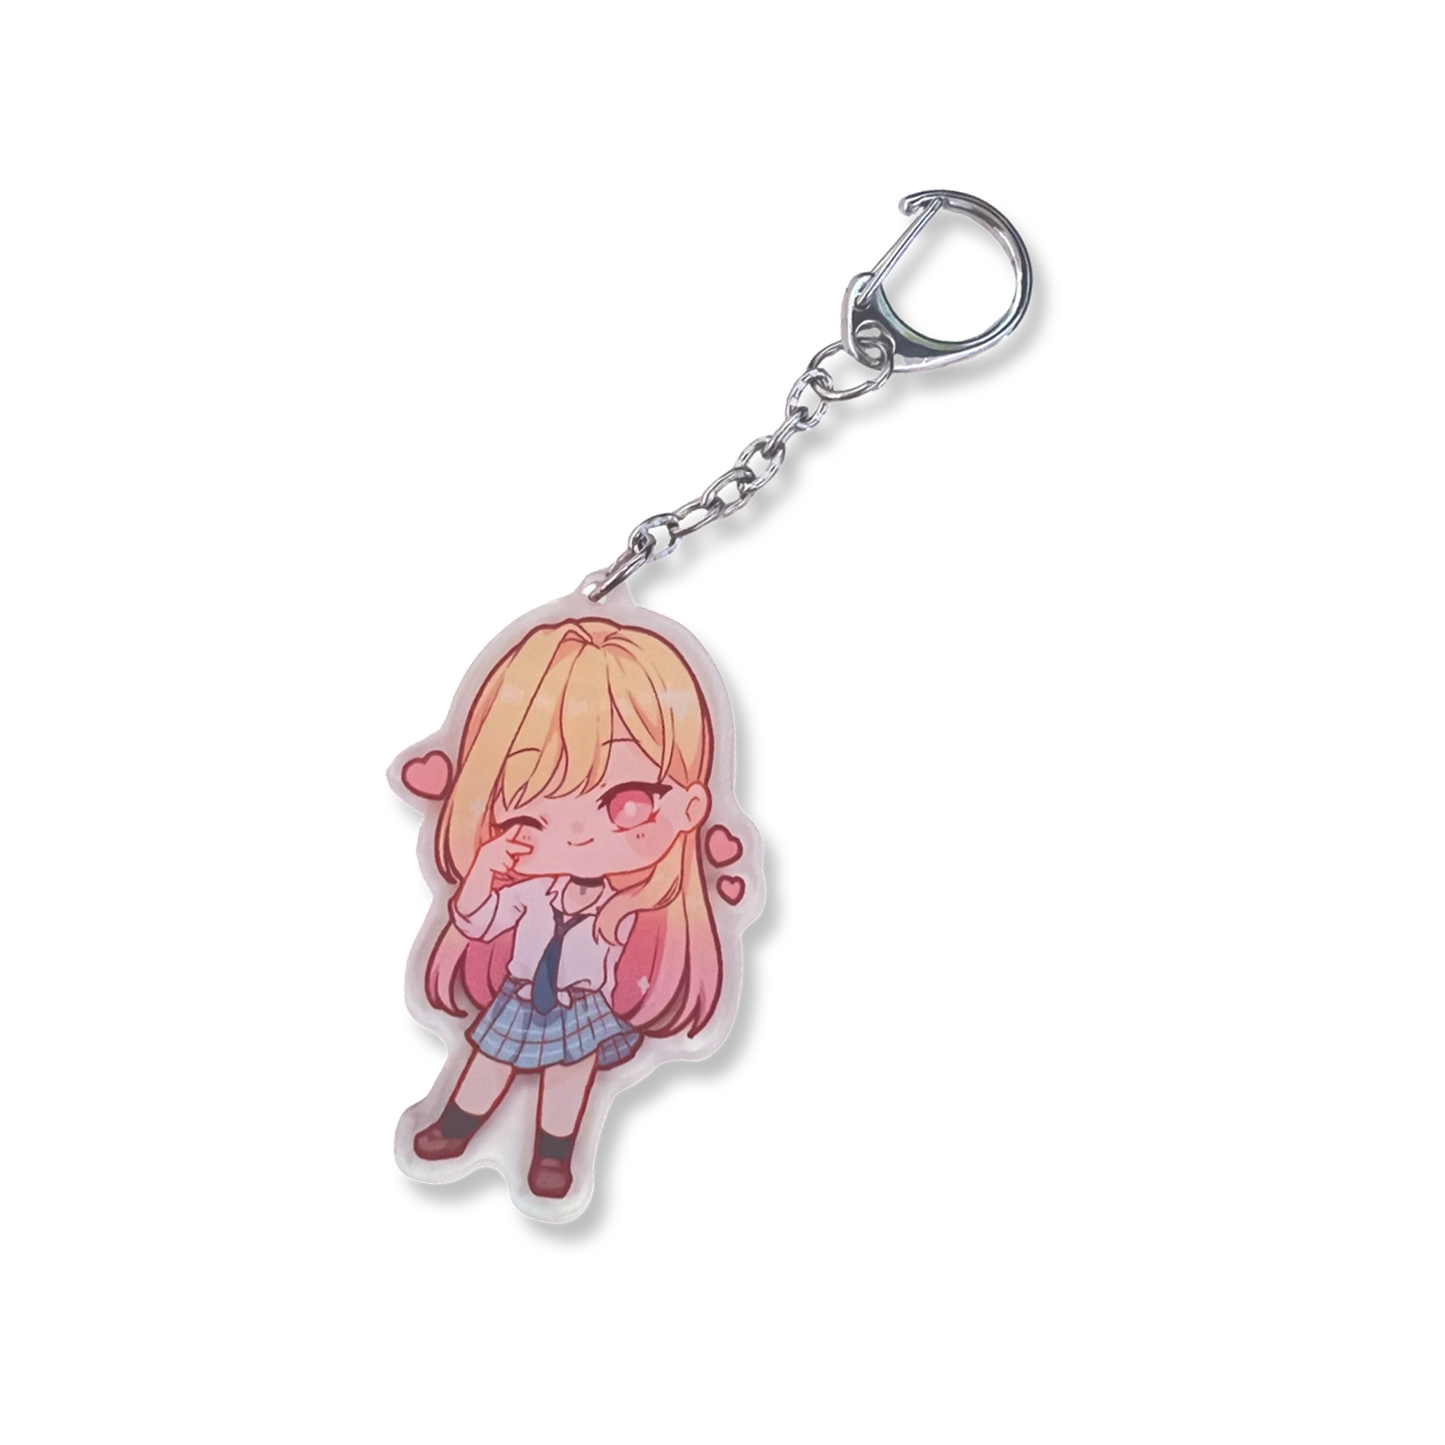 Marin School Girl Outfit Keychain design features Marin from My Dress Up Darling wearing her school girl outfit on an acrylic keychain.